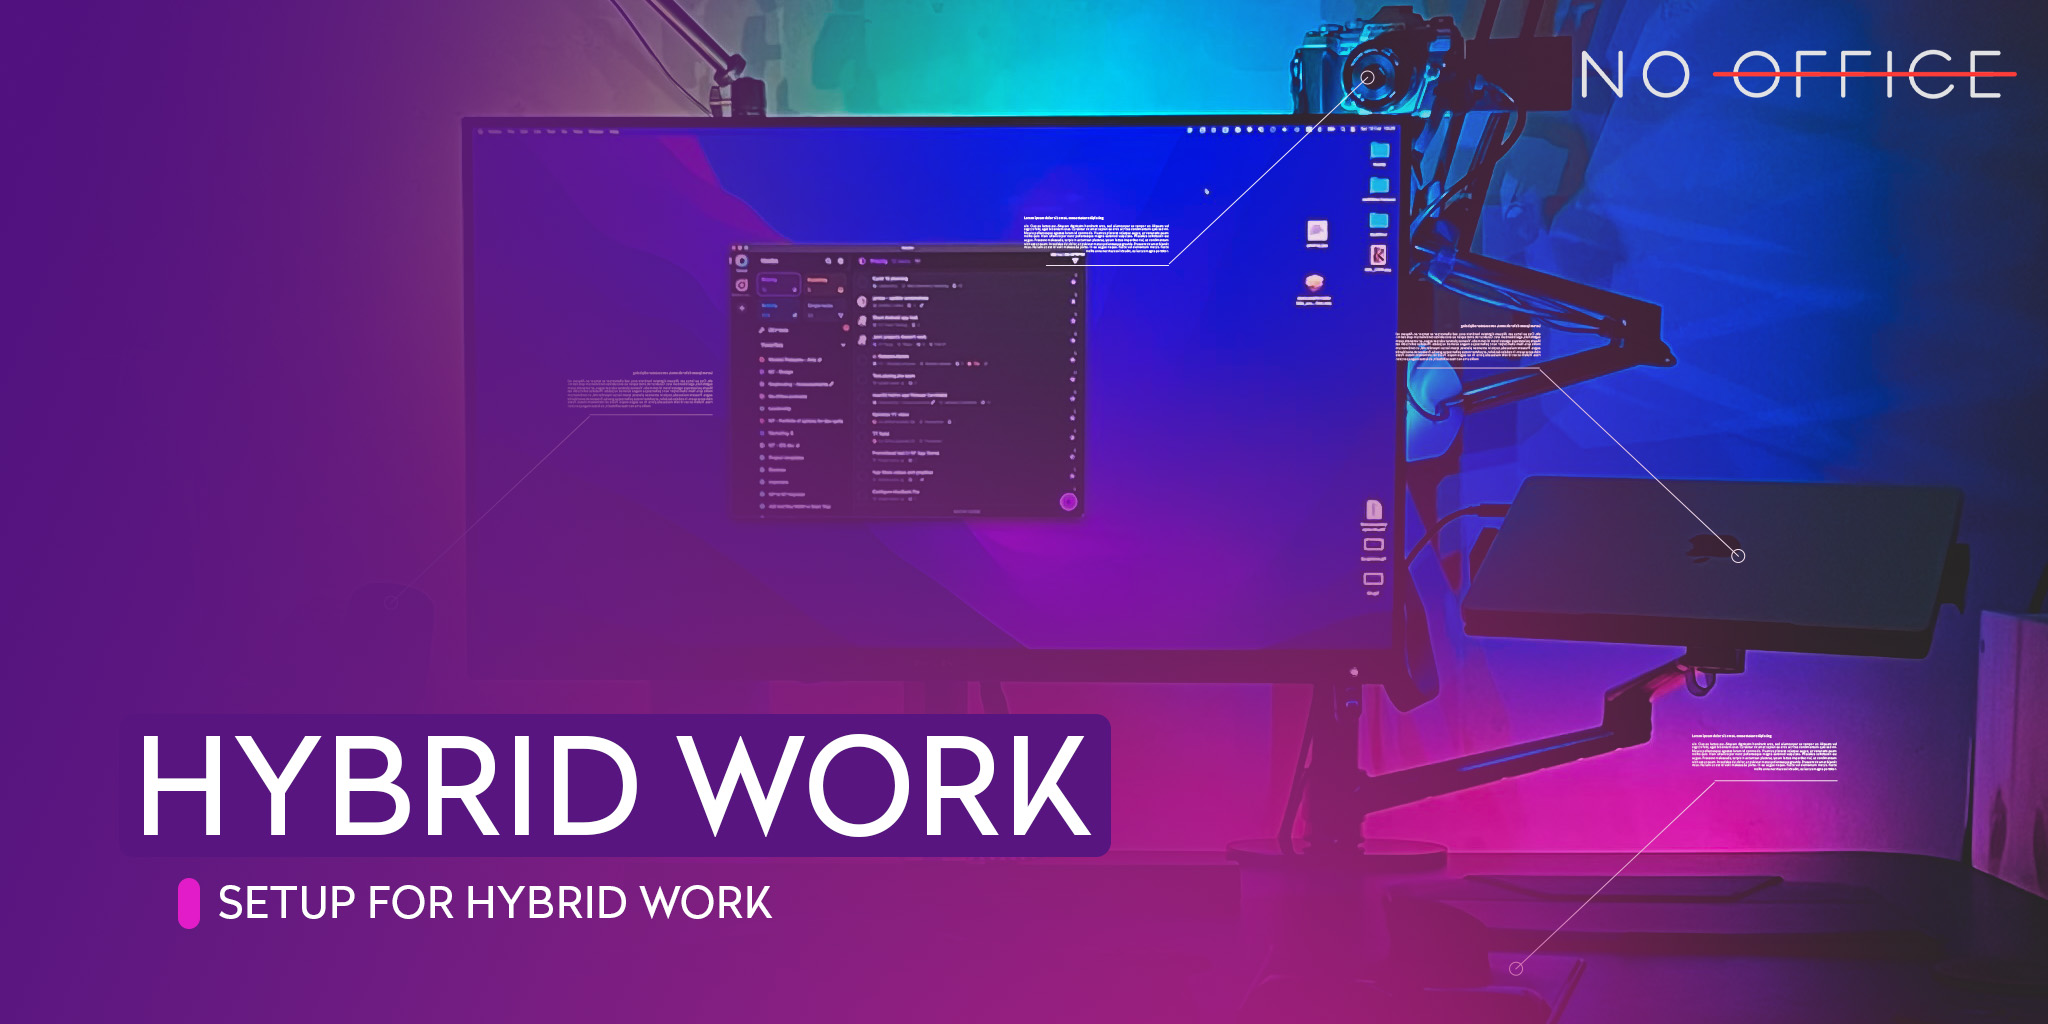 Hybrid work. Practical tips - The *No Office* Podcast, ep. 38